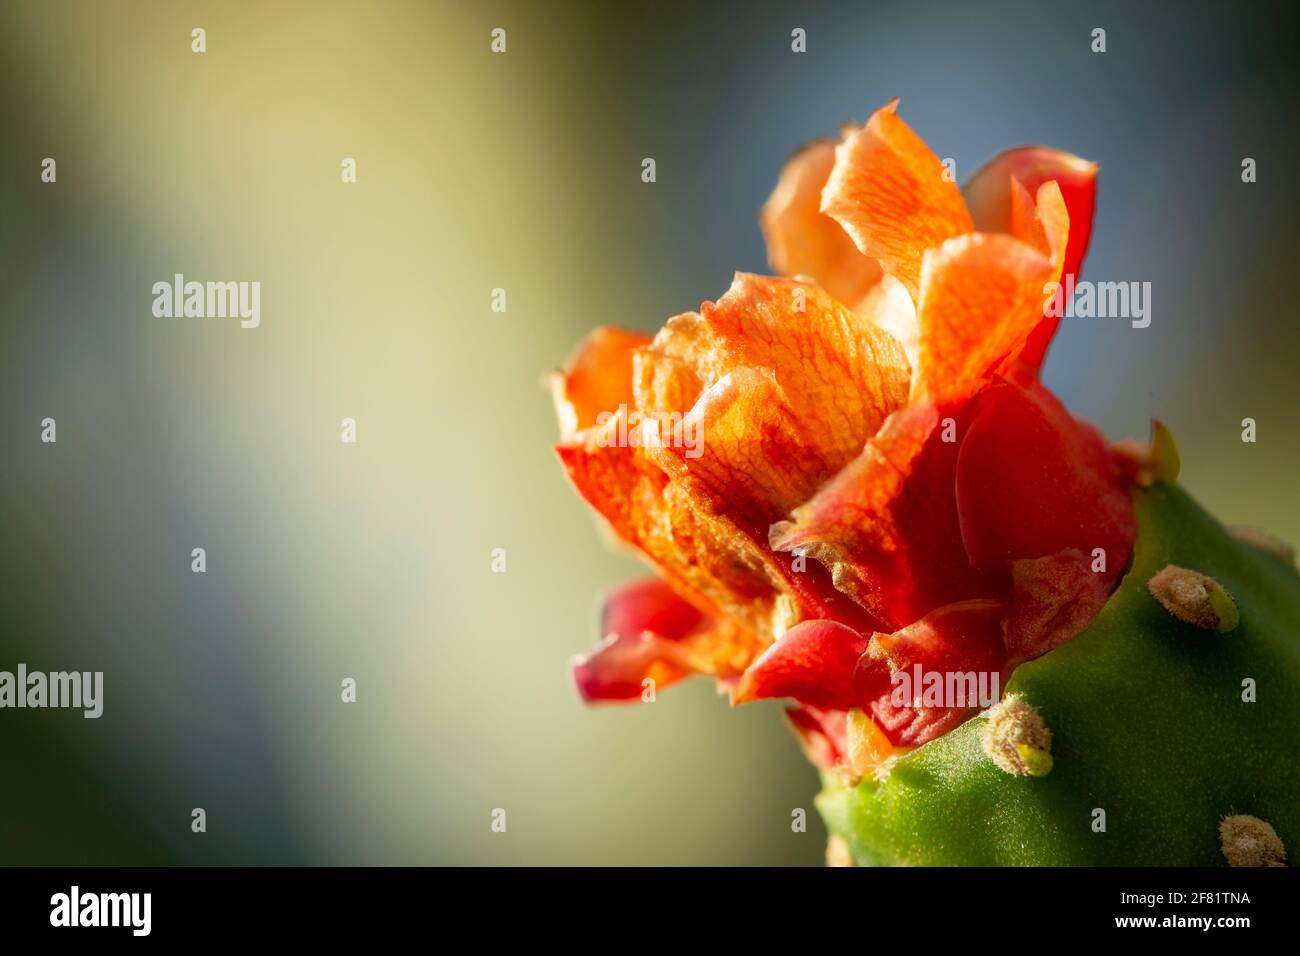 blooming cactus plant. Stock Photo